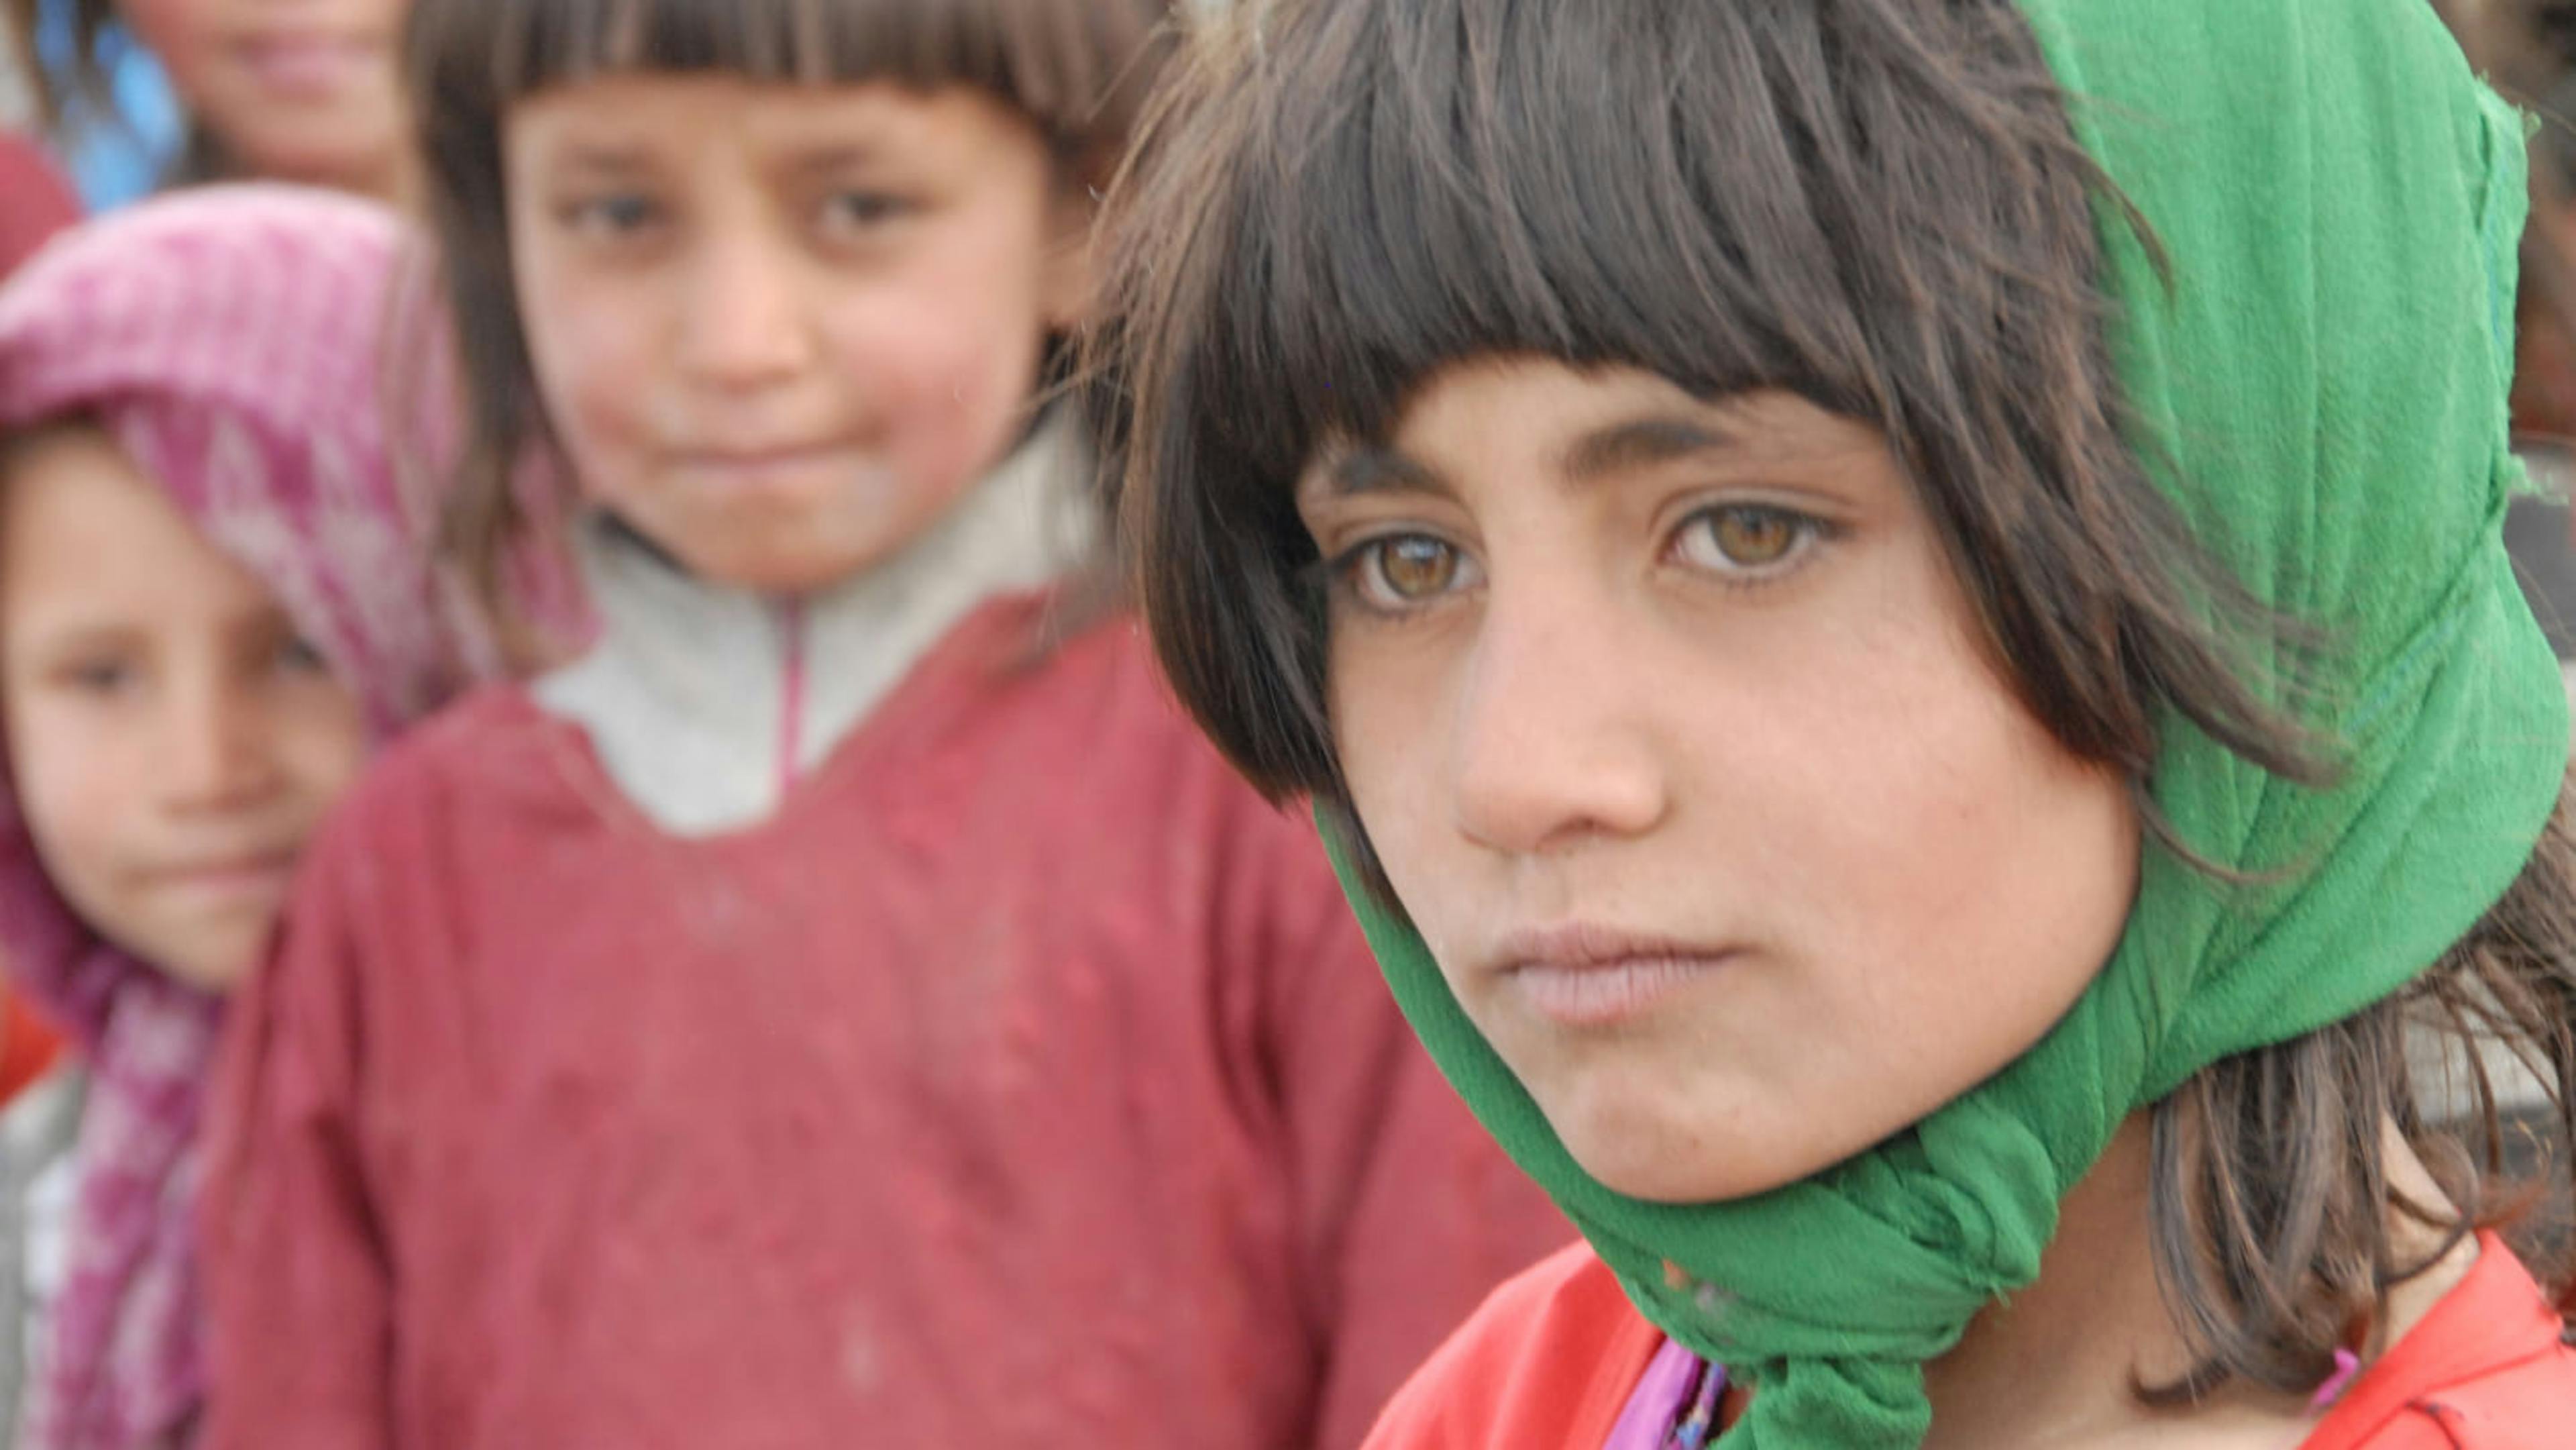 Young Afghani girls are facing a bleak future now that the Taliban has returned to power.